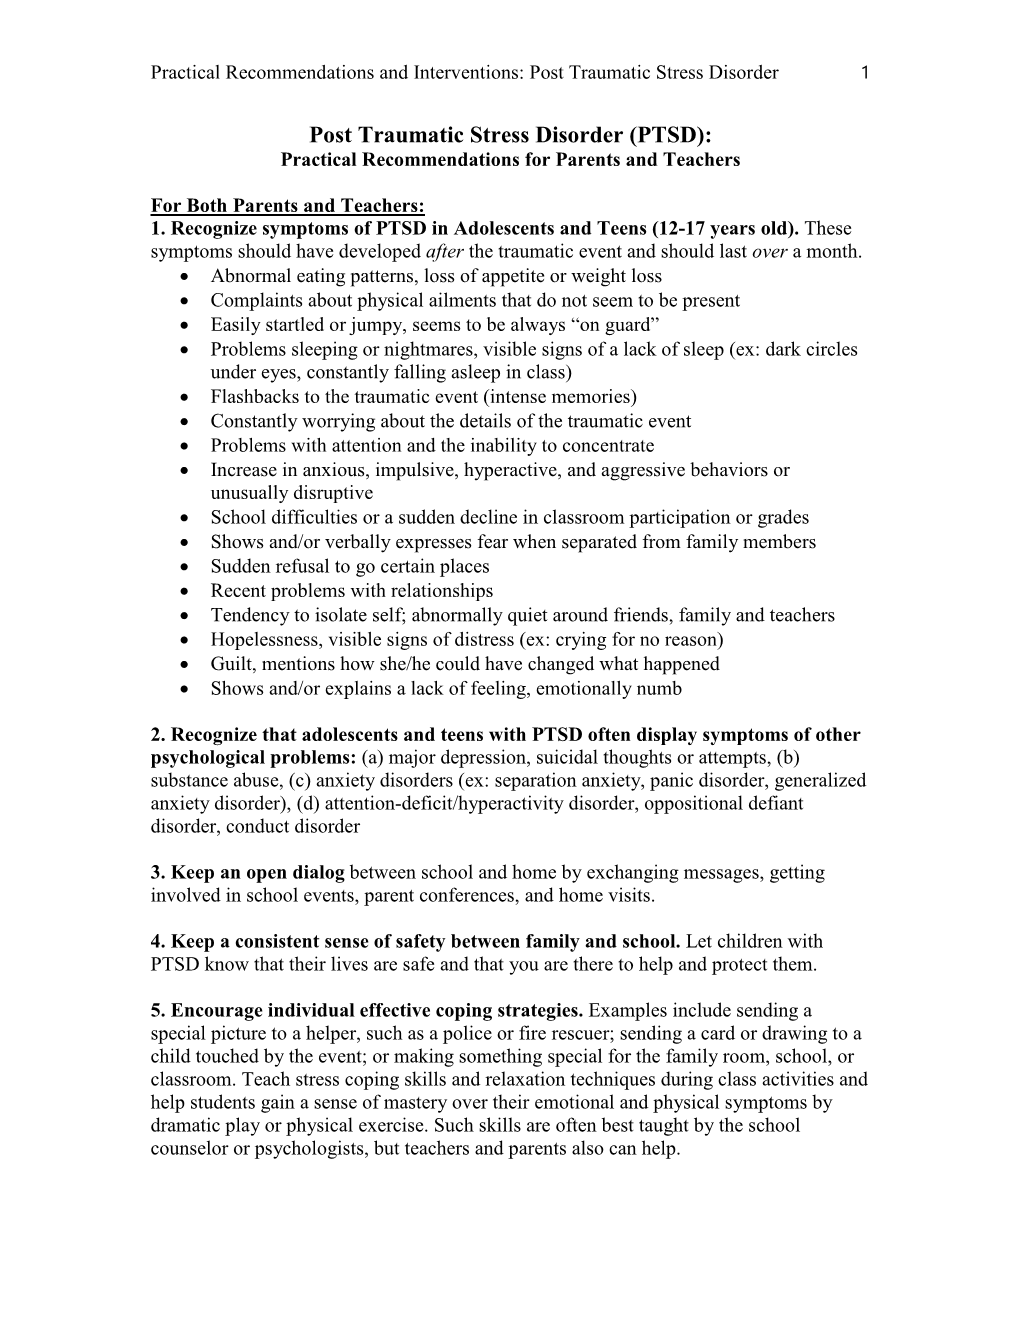 Post Traumatic Stress Disorder (PTSD): Practical Recommendations for Parents and Teachers